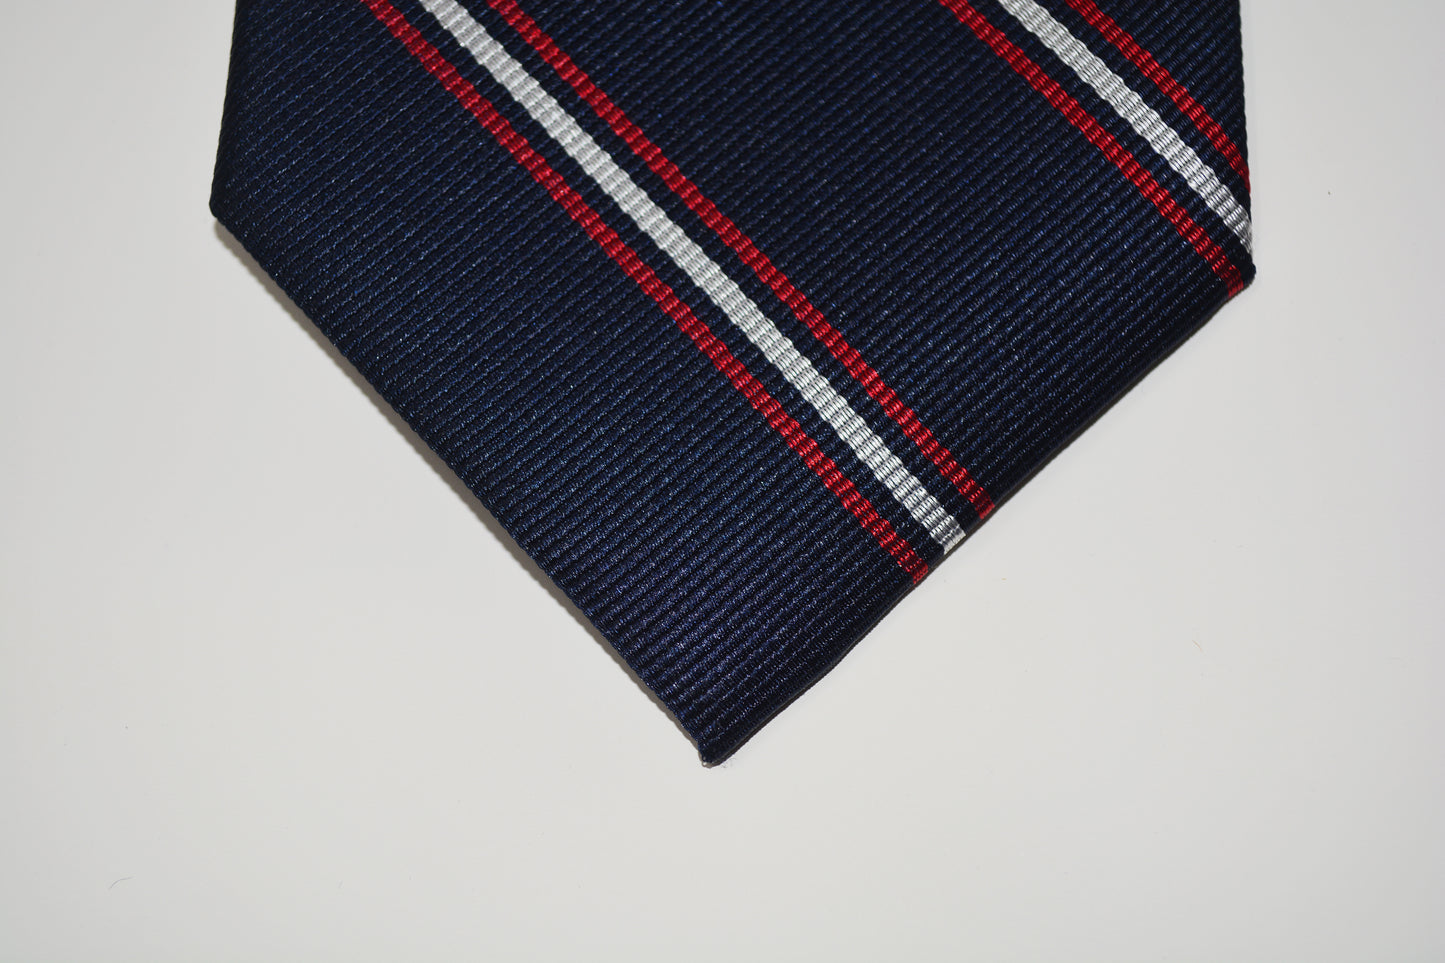 Red and White Stripes on Navy Necktie - Navy, Woven Silk